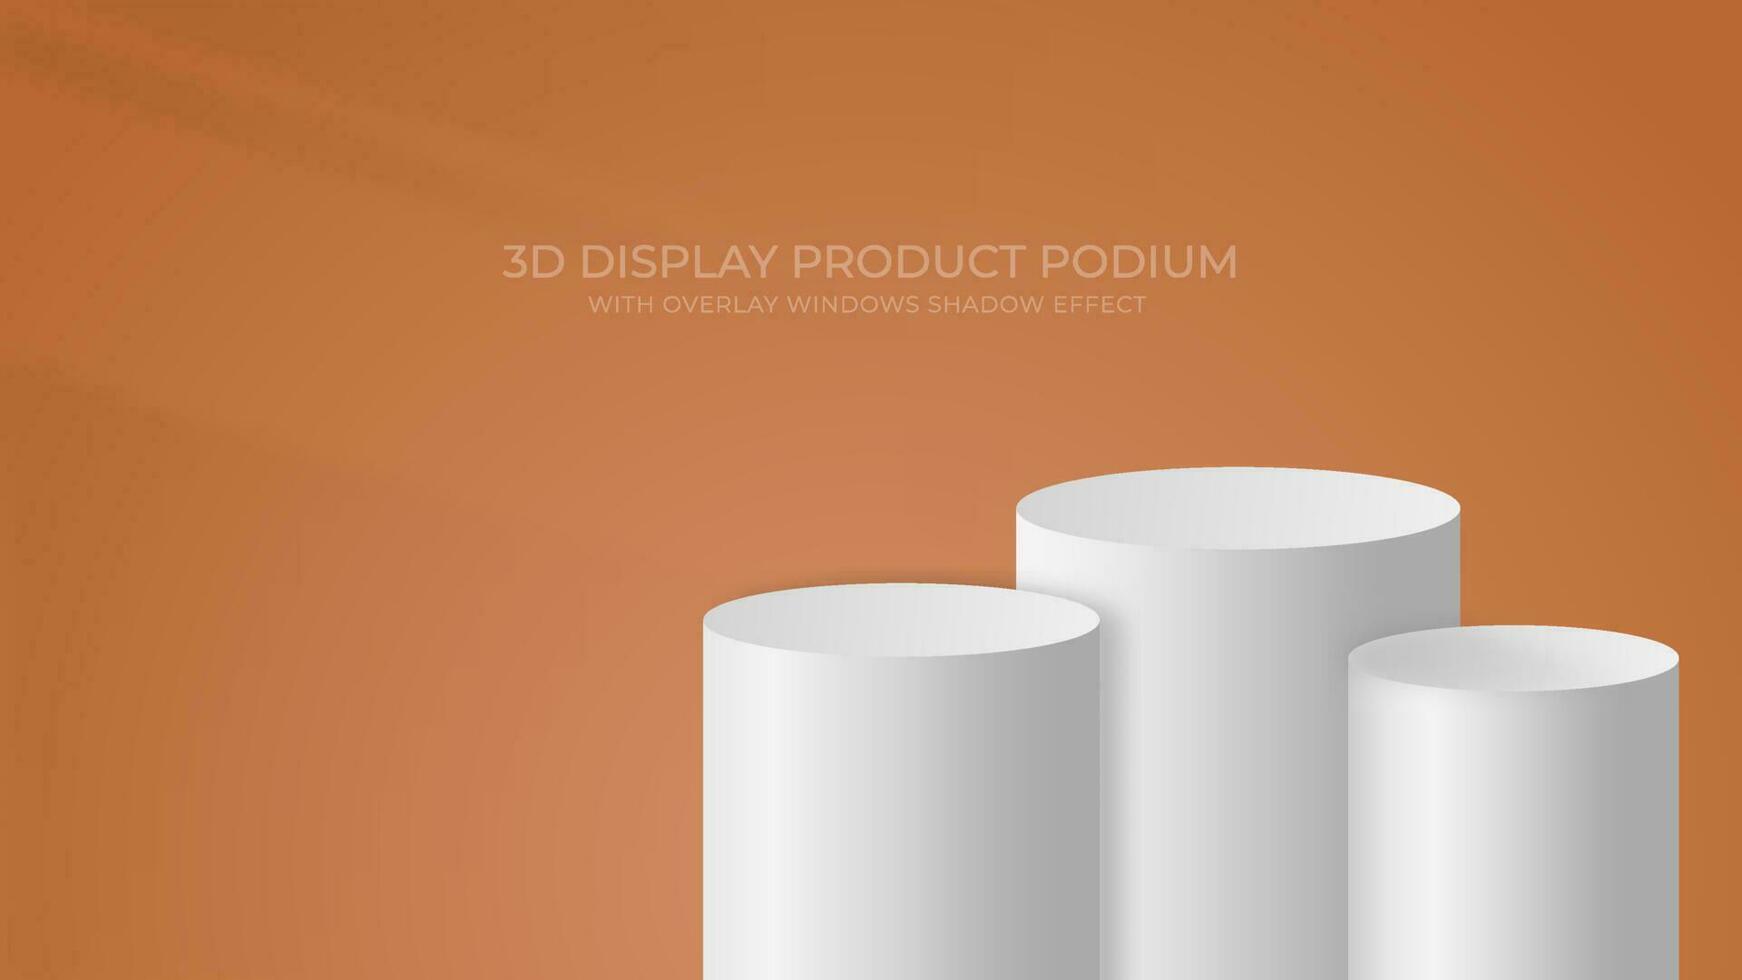 3D Display Product Podium Platform Decorated Tall Cylinder, Brown Background and Overlay Windows Shadow Effects, and Suitable for Display Promotion Product Fashion, Cosmetic, Beauty, Women vector